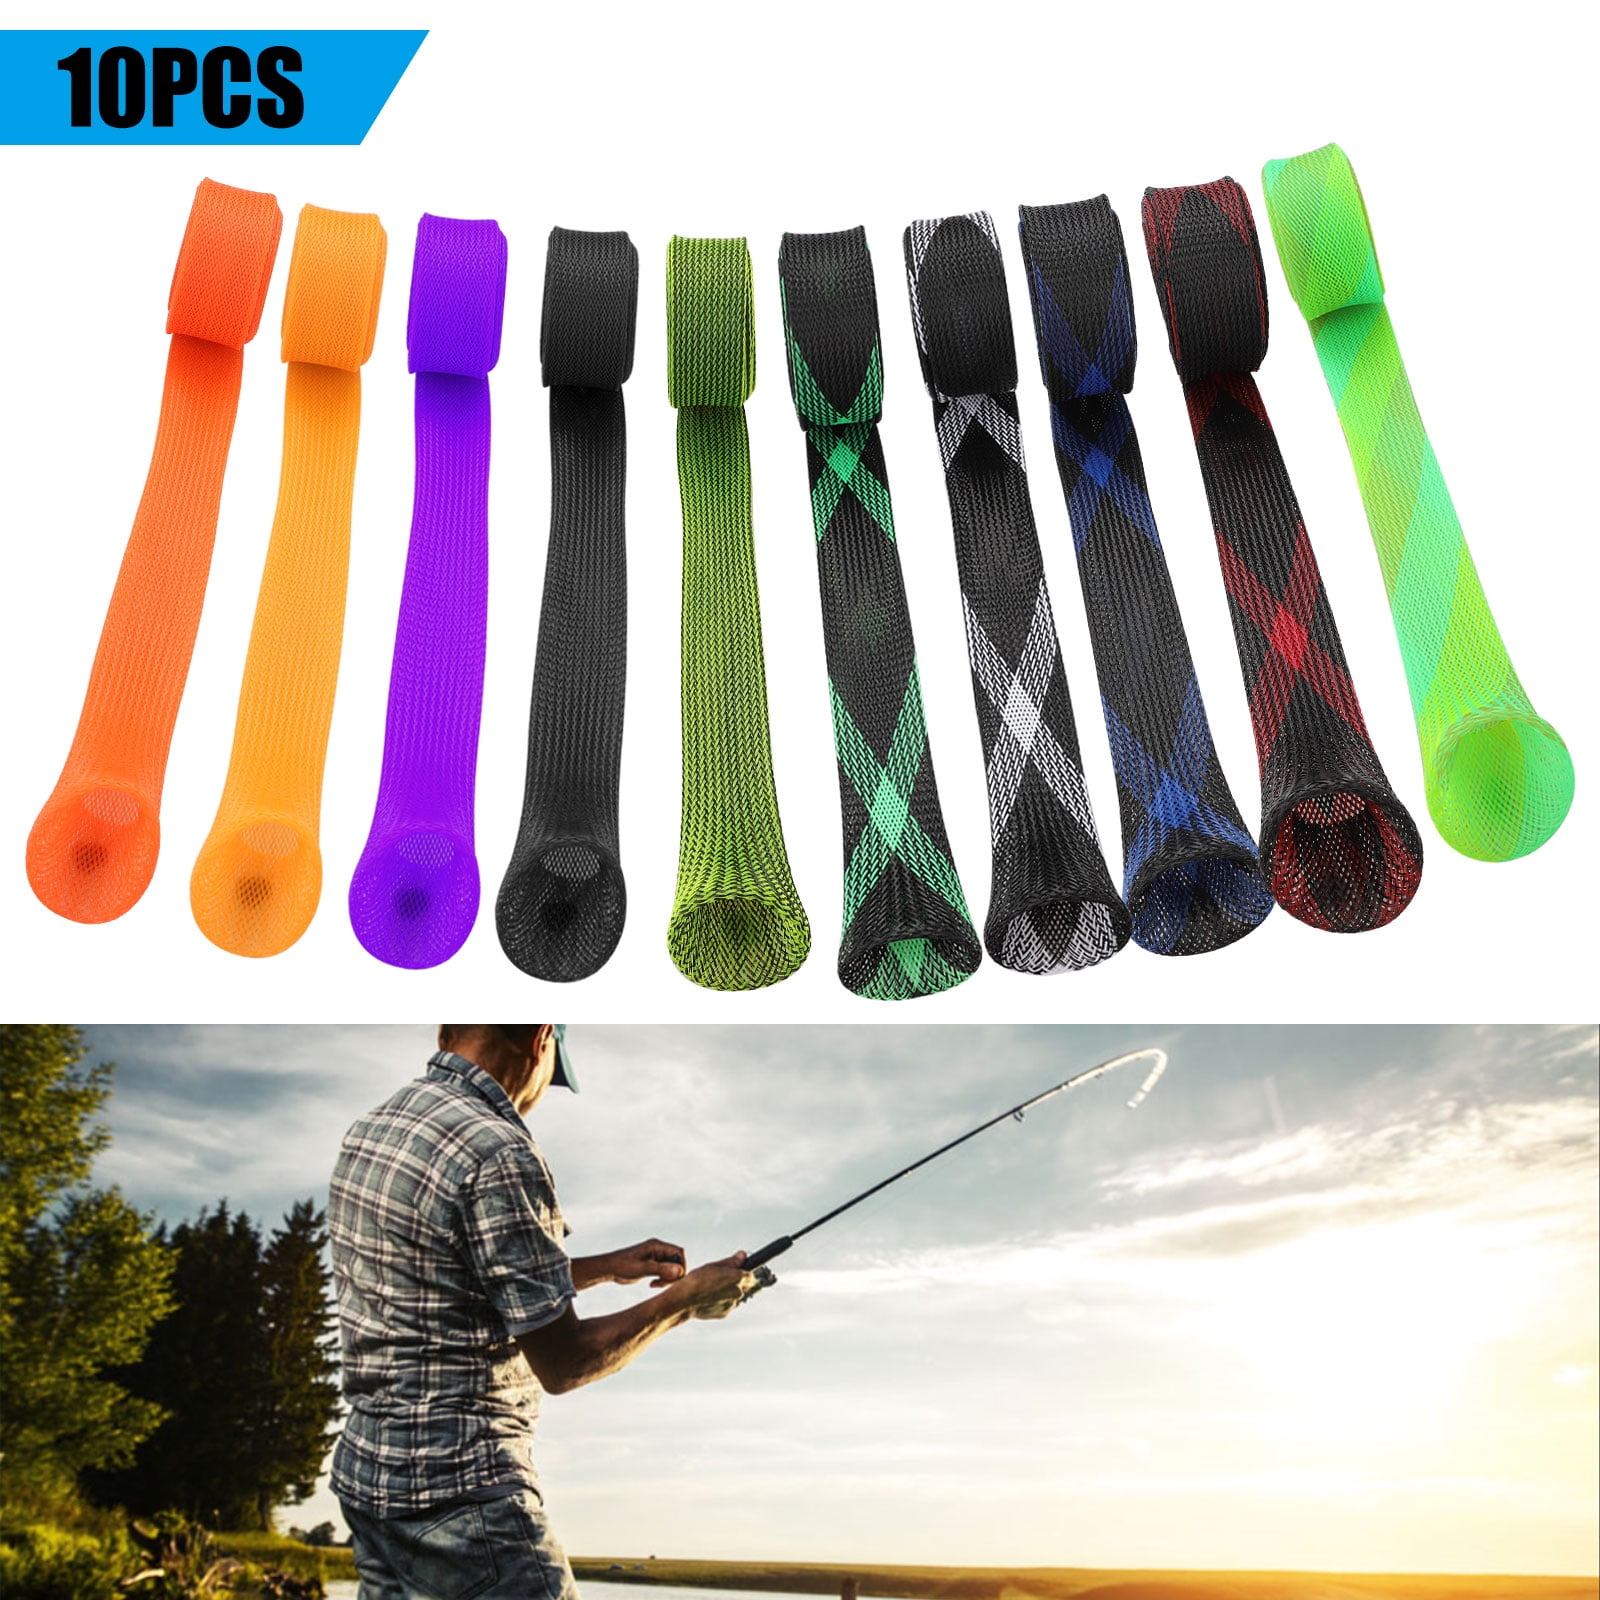 Fishing rod tip cover rod sleeve glove tie protection